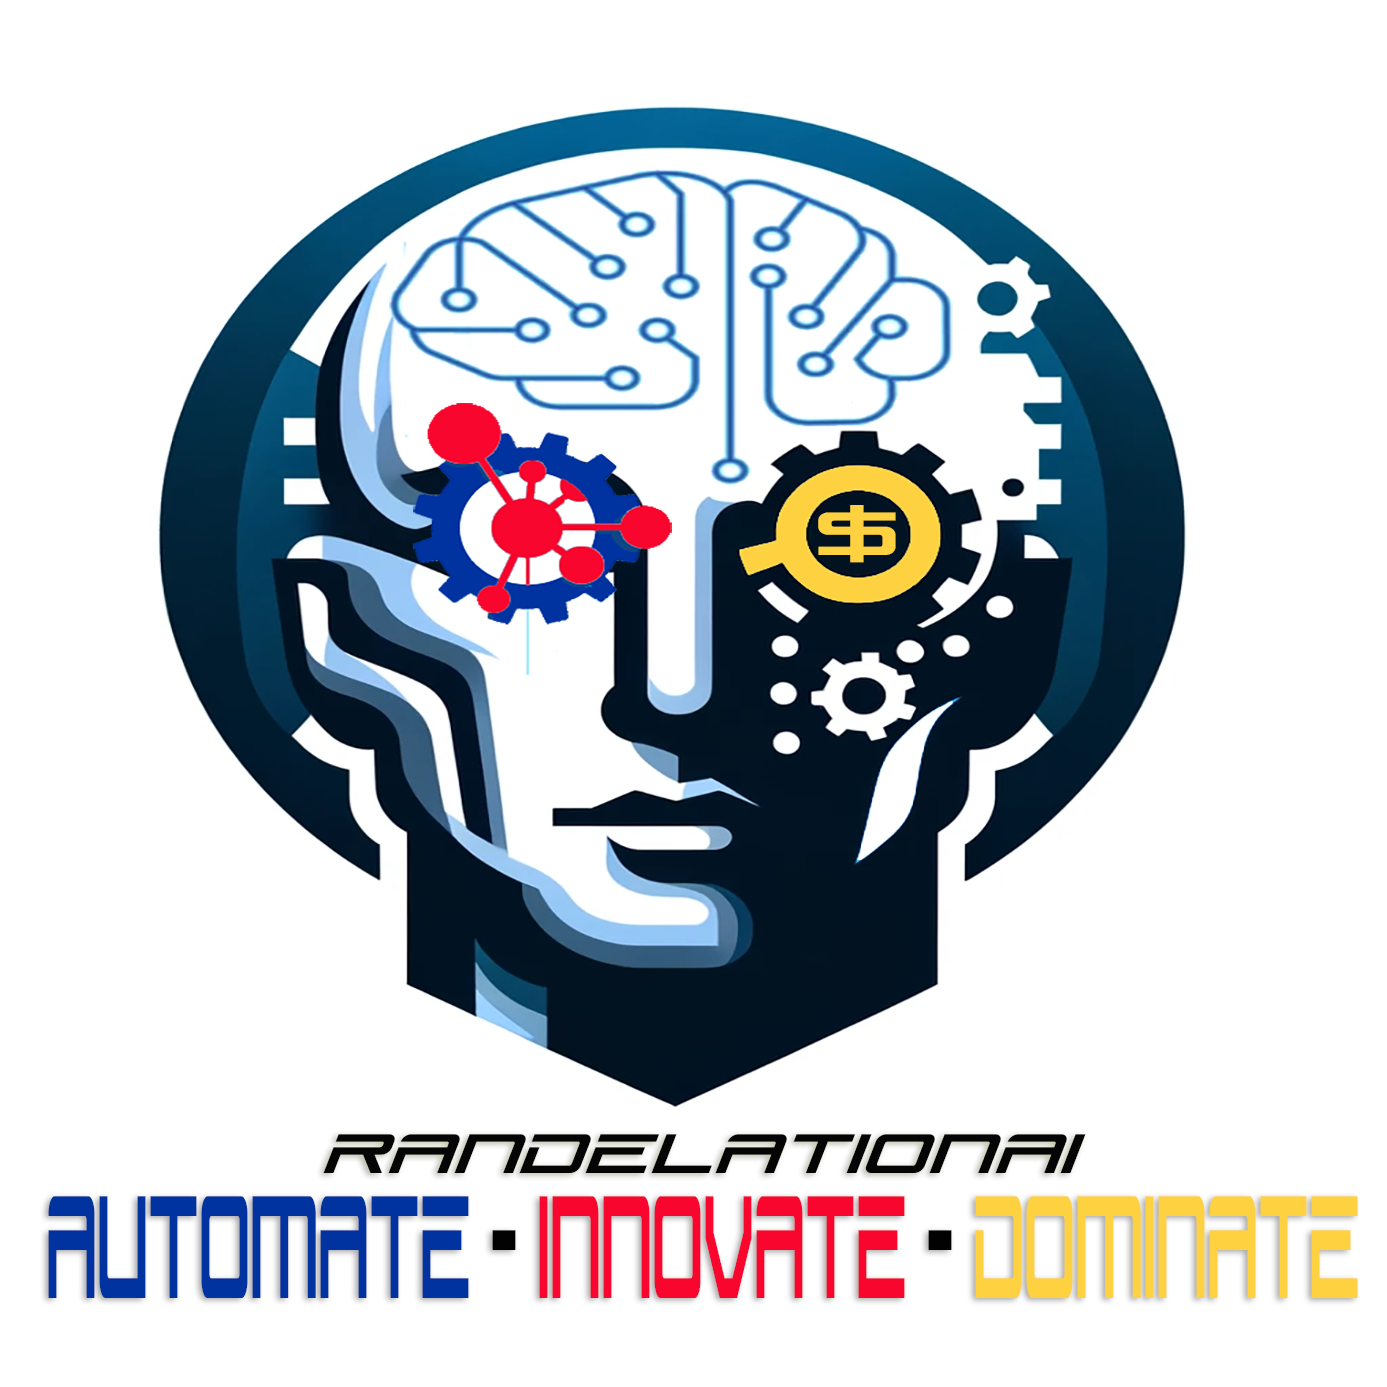 The RandelationAI Podcast - Automate, Innovate, Dominate: Leveraging AI and ML for Business Breakthroughs